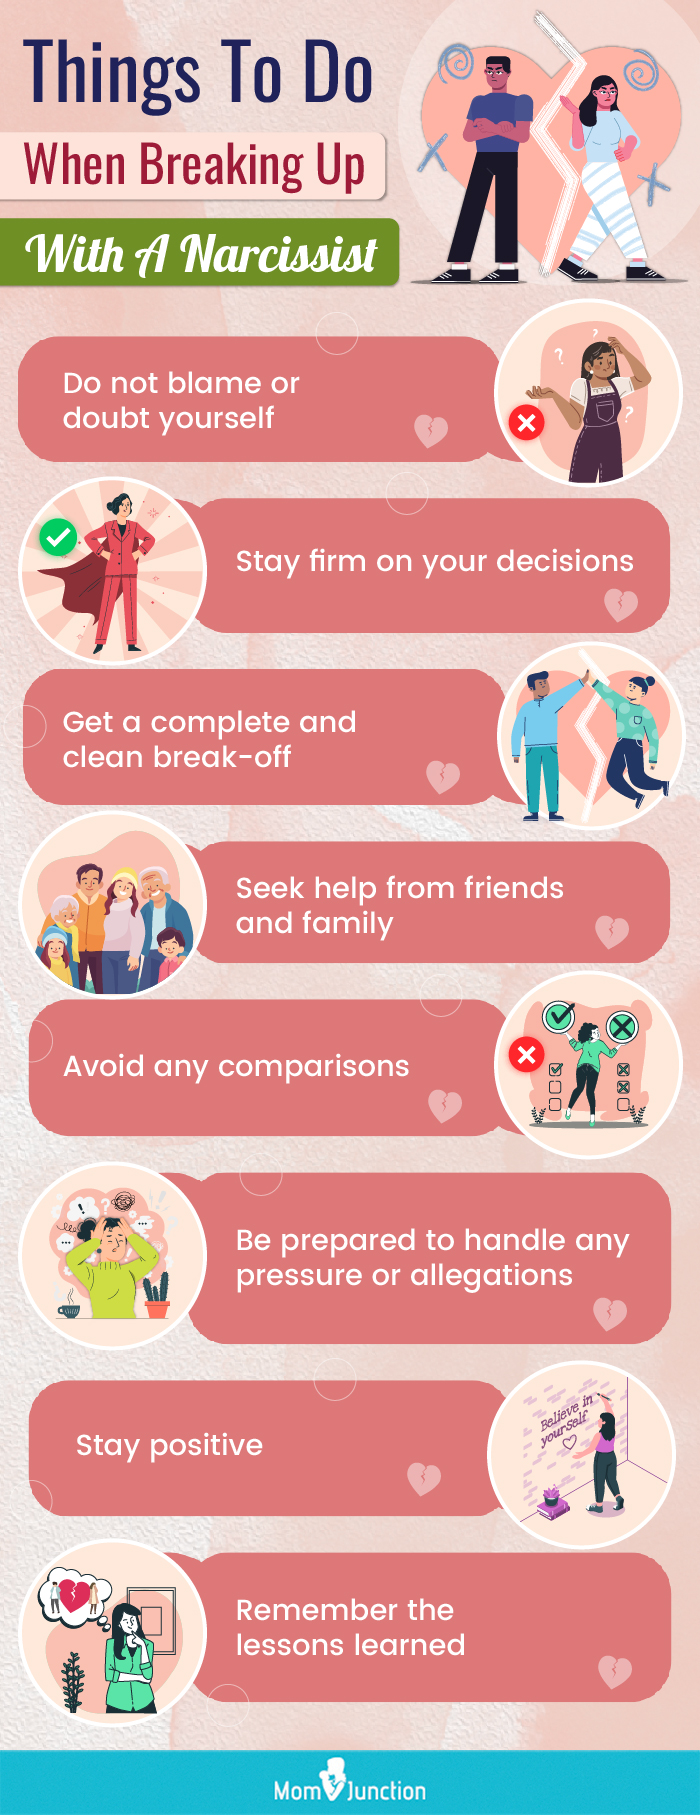 things to do when breaking up with a narcissist (infographic)